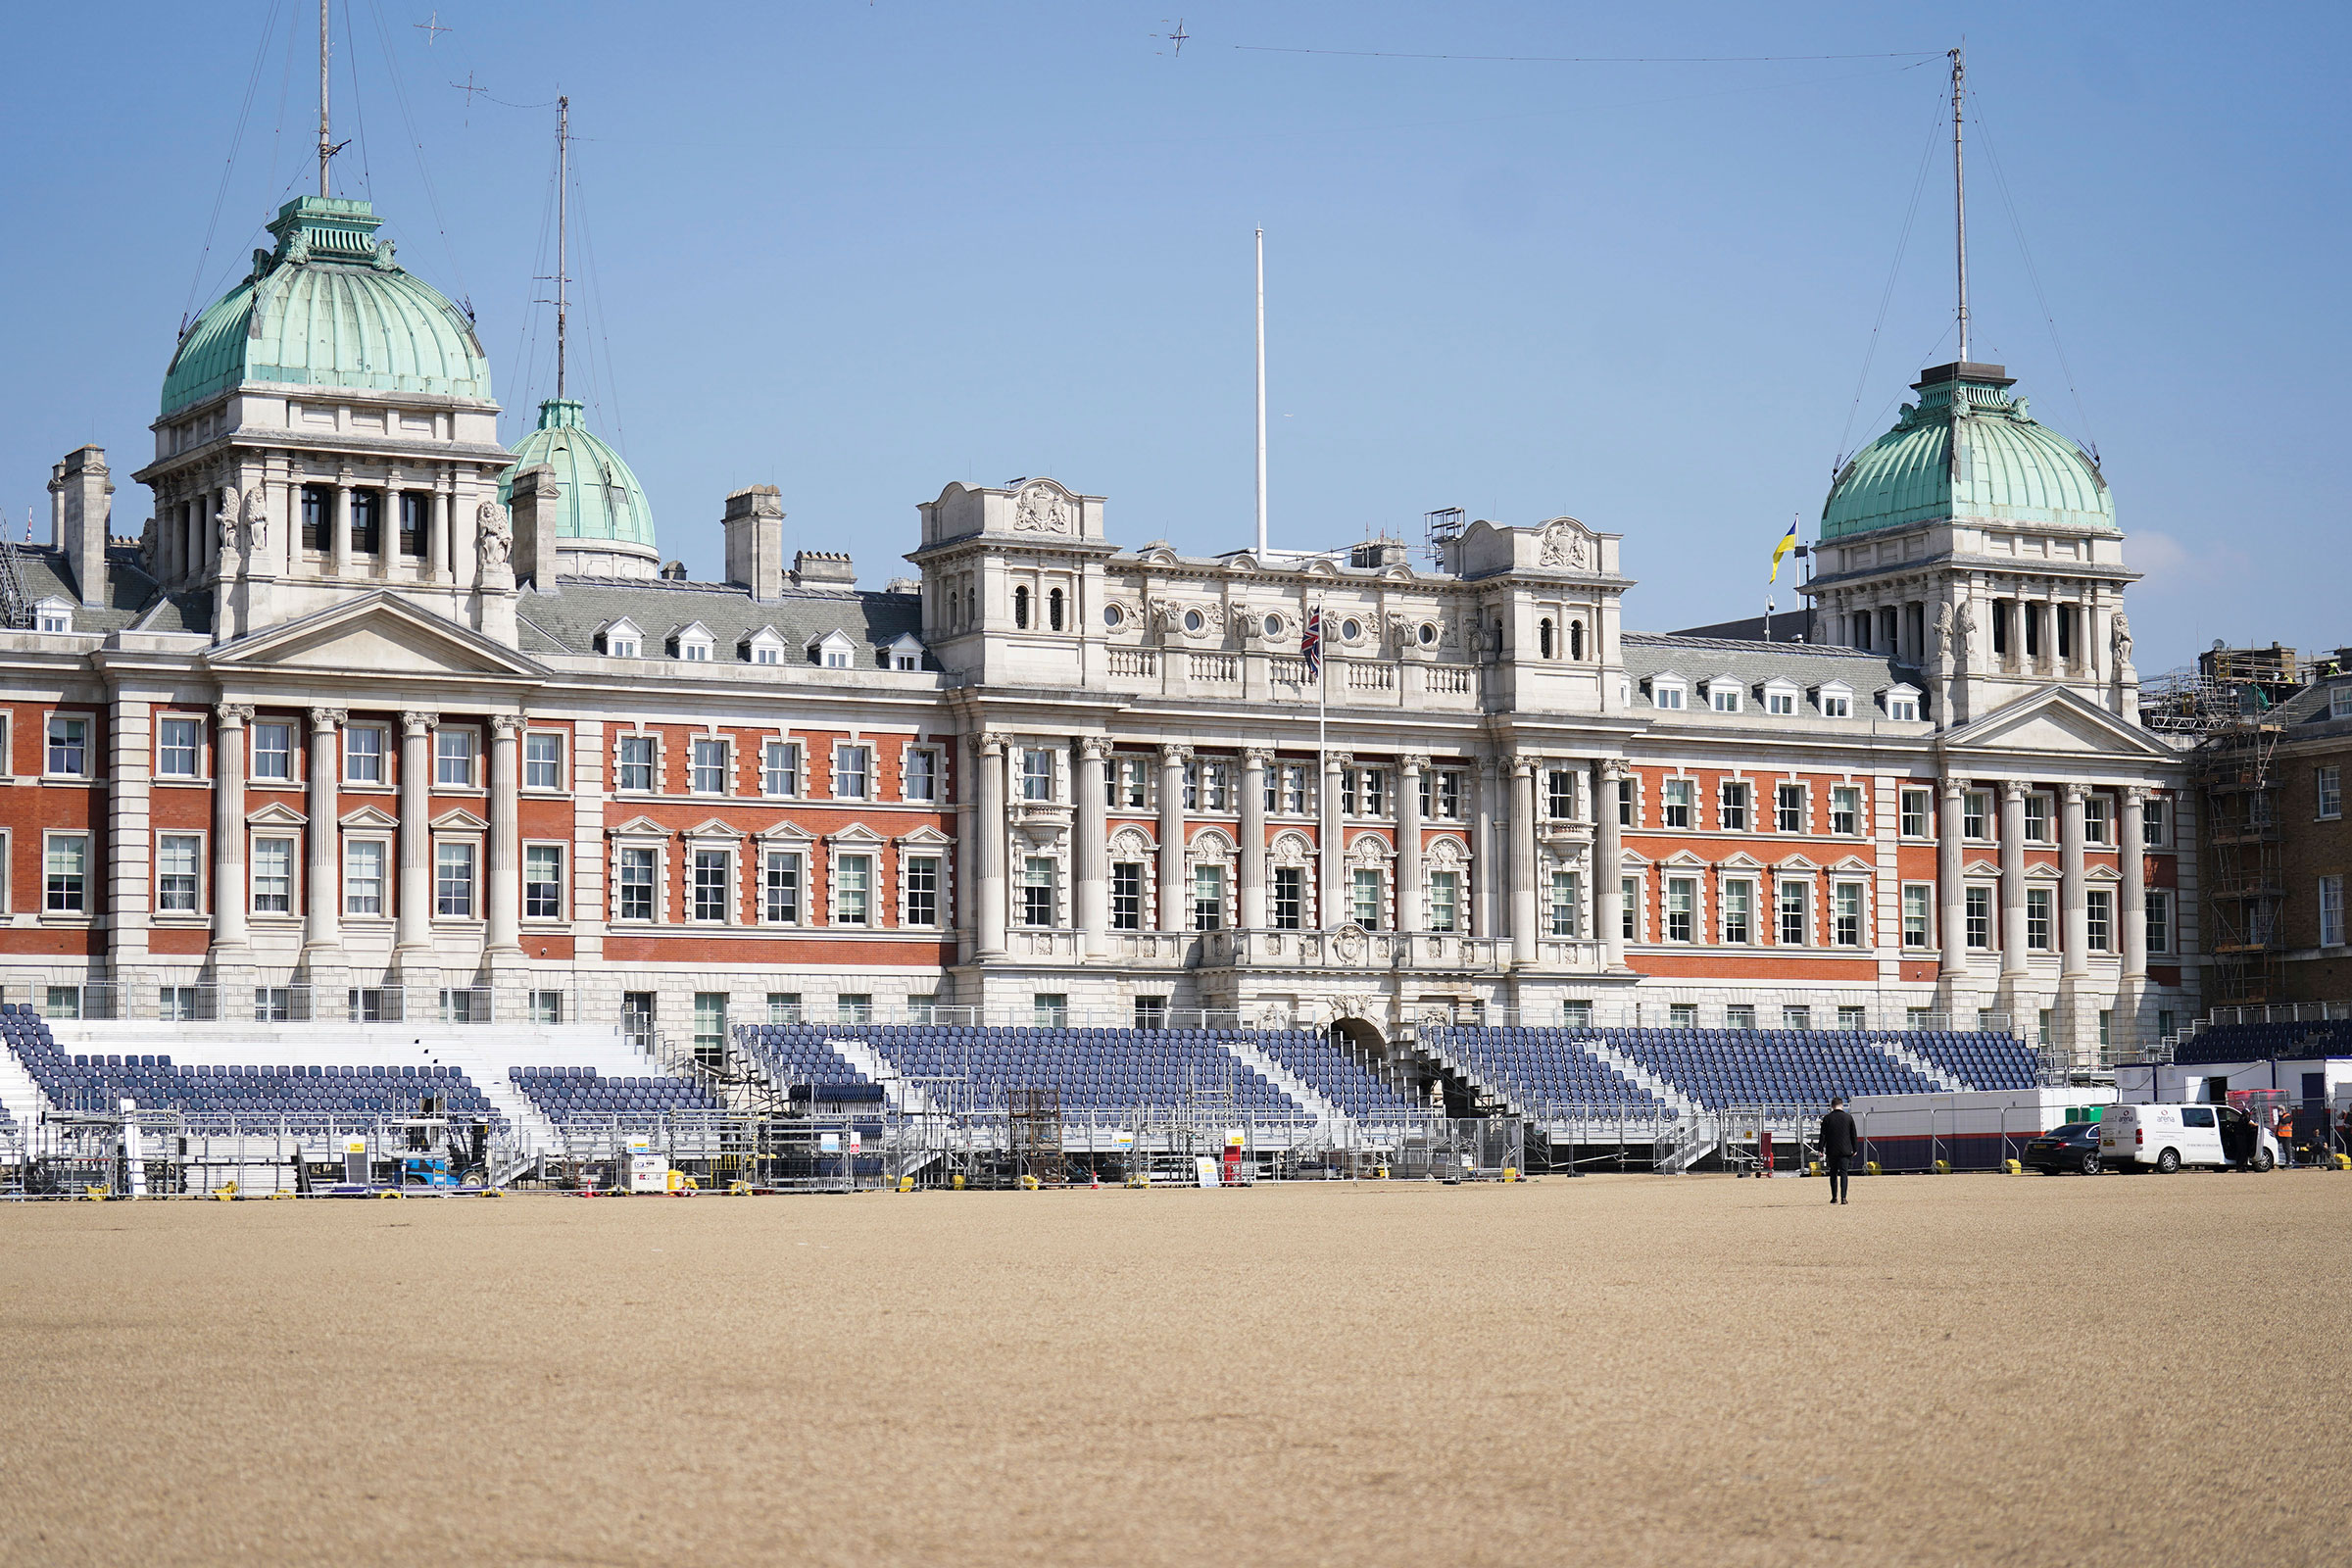 Seating surrounds Horse Guards Parade, London, where preparations are underway on April 17, 2023 for the coronation of King Charles III and the Queen Consort on May 6. (PA Wire/AP)